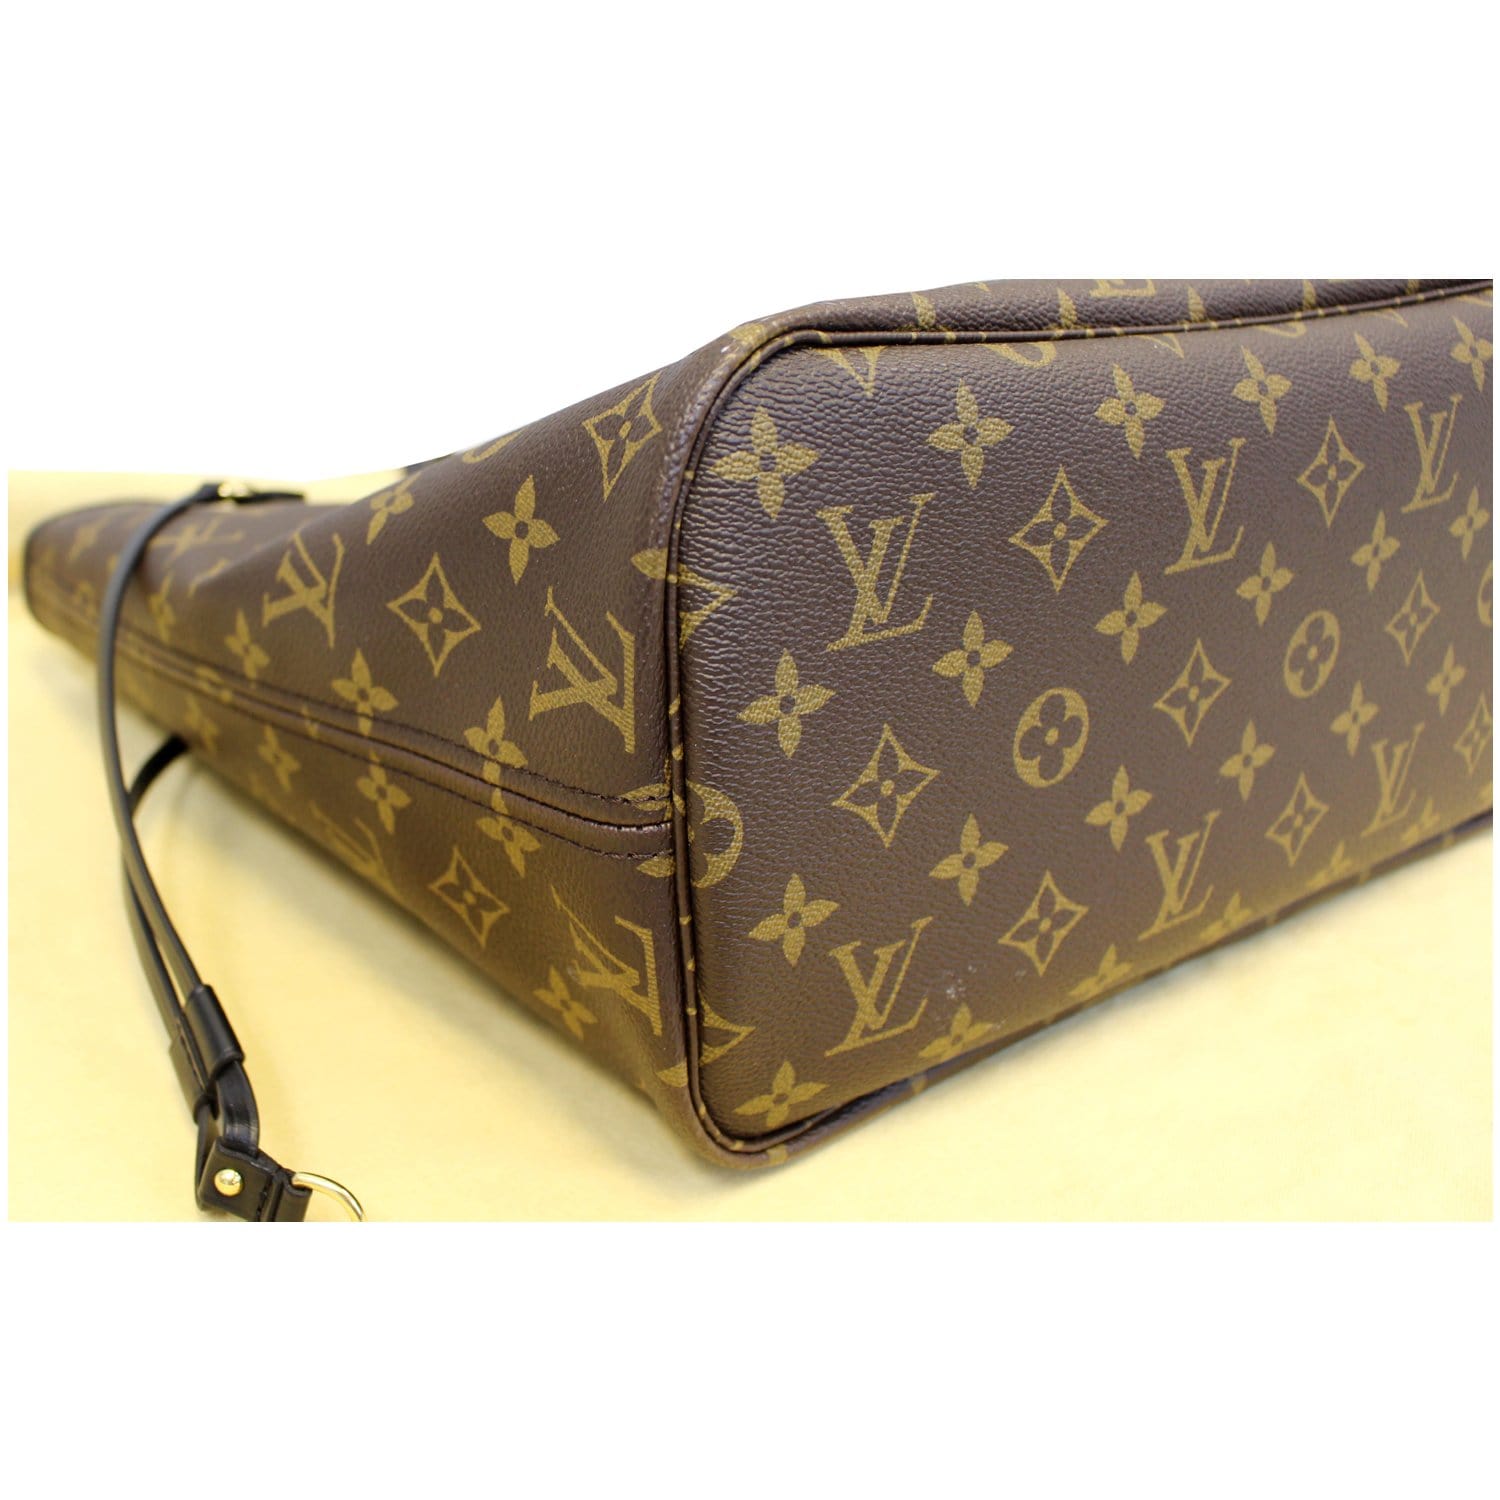 How To Spot A Real Louis Vuitton Neverfull